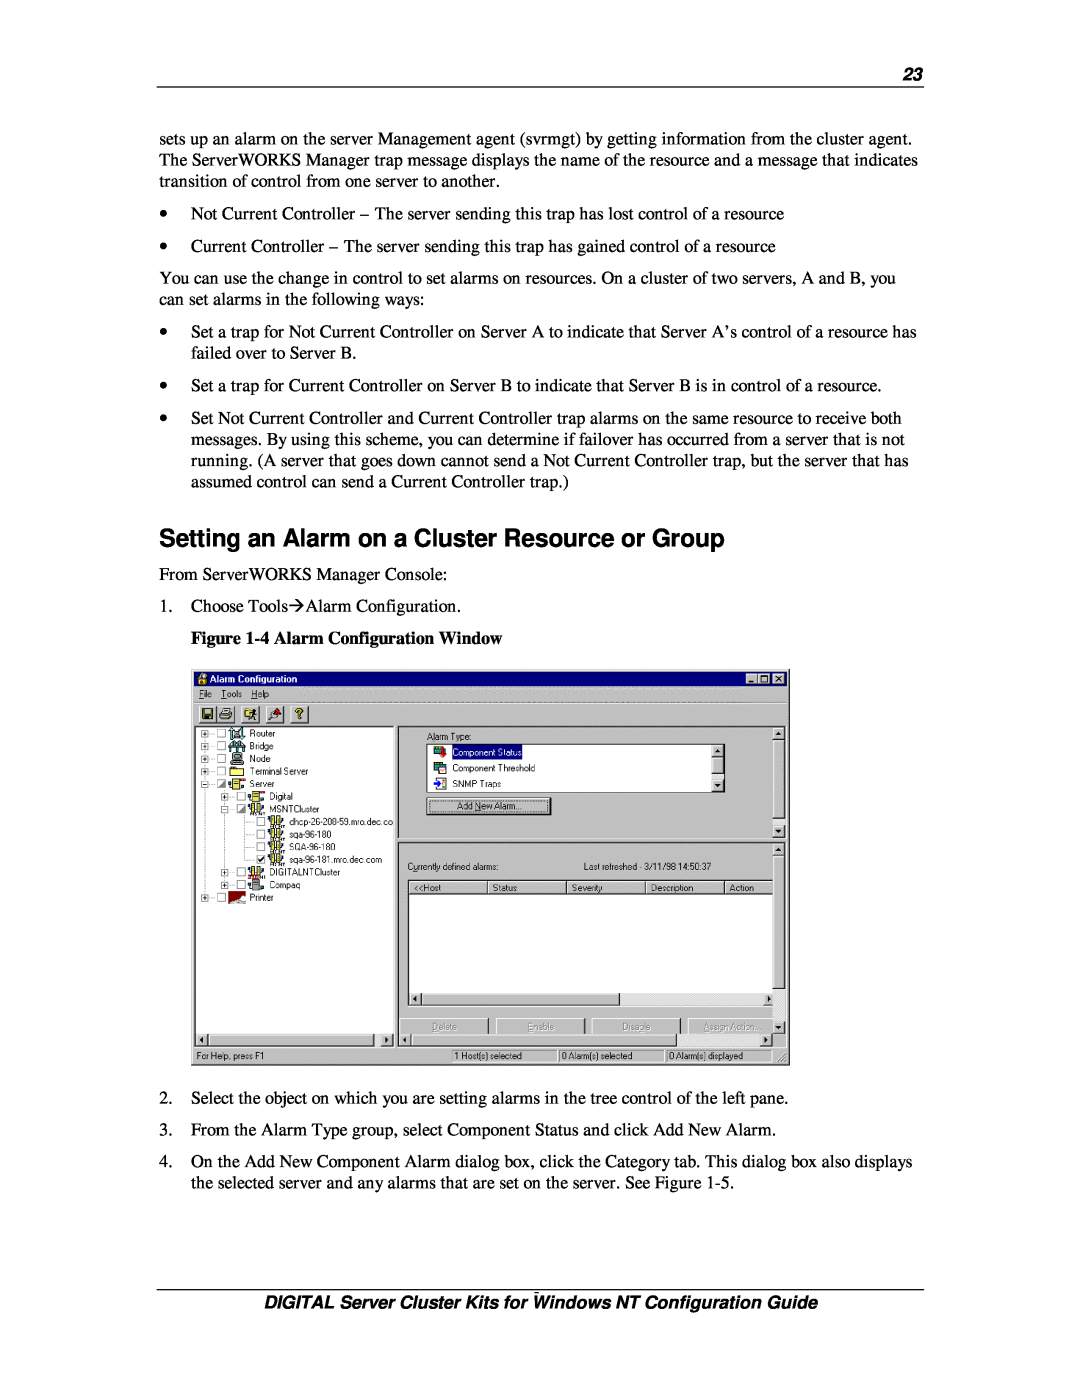 Compaq DIGITAL Server Cluster Kits for Windows NT manual Setting an Alarm on a Cluster Resource or Group 